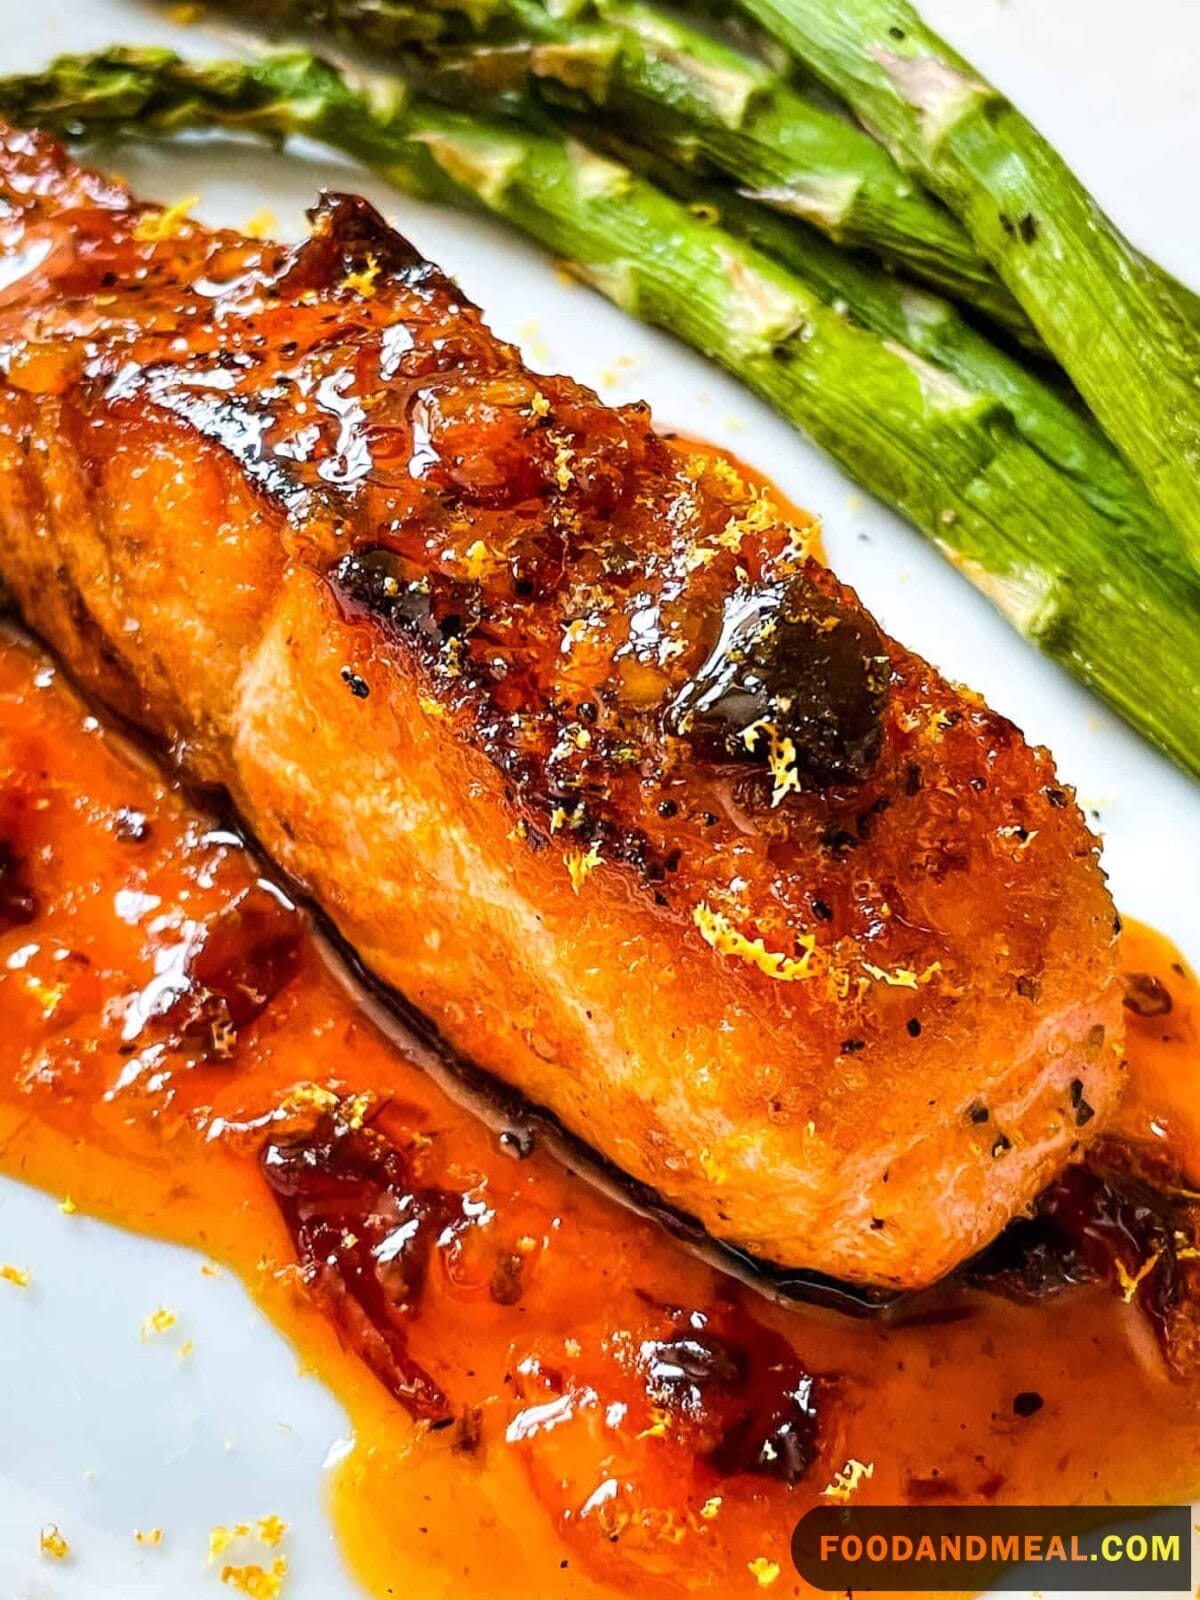 Grilled Salmon In Orange-Soy Marinade